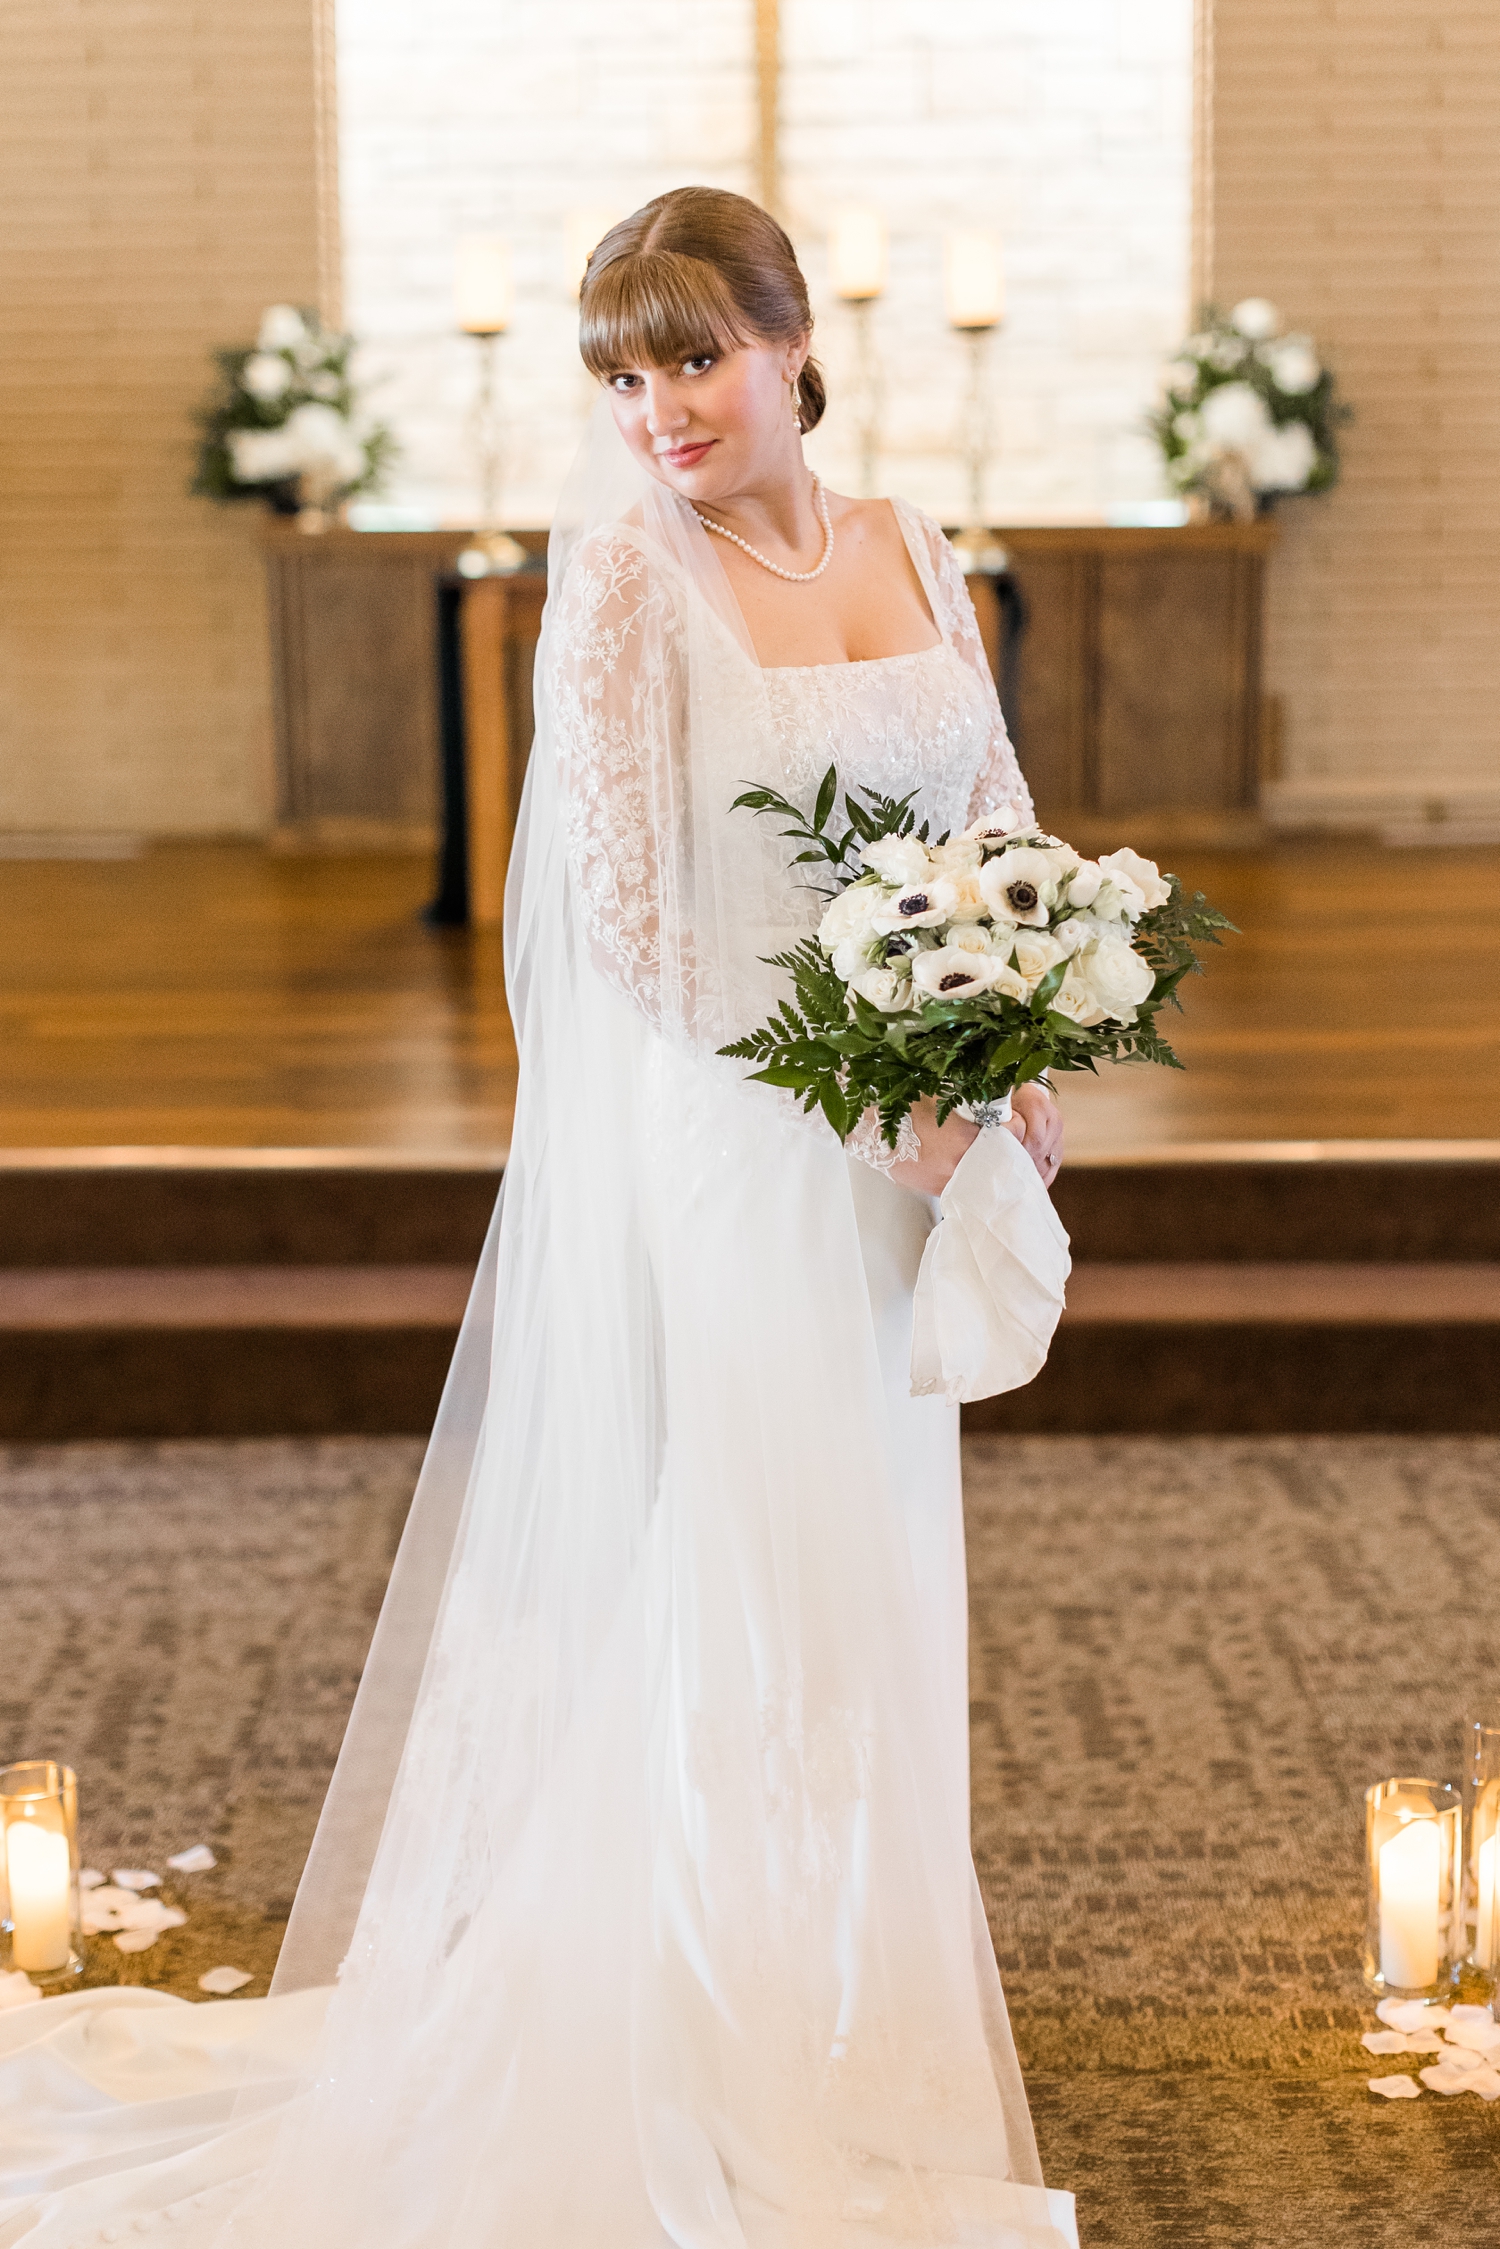 Bride, Madeline, dressed in a custom Stella York long sleeve wedding gown with custom cathedral length veil standing in a wooden church isle surrounded by candlelight holding a white rose and anemone bouquet | CB Studio